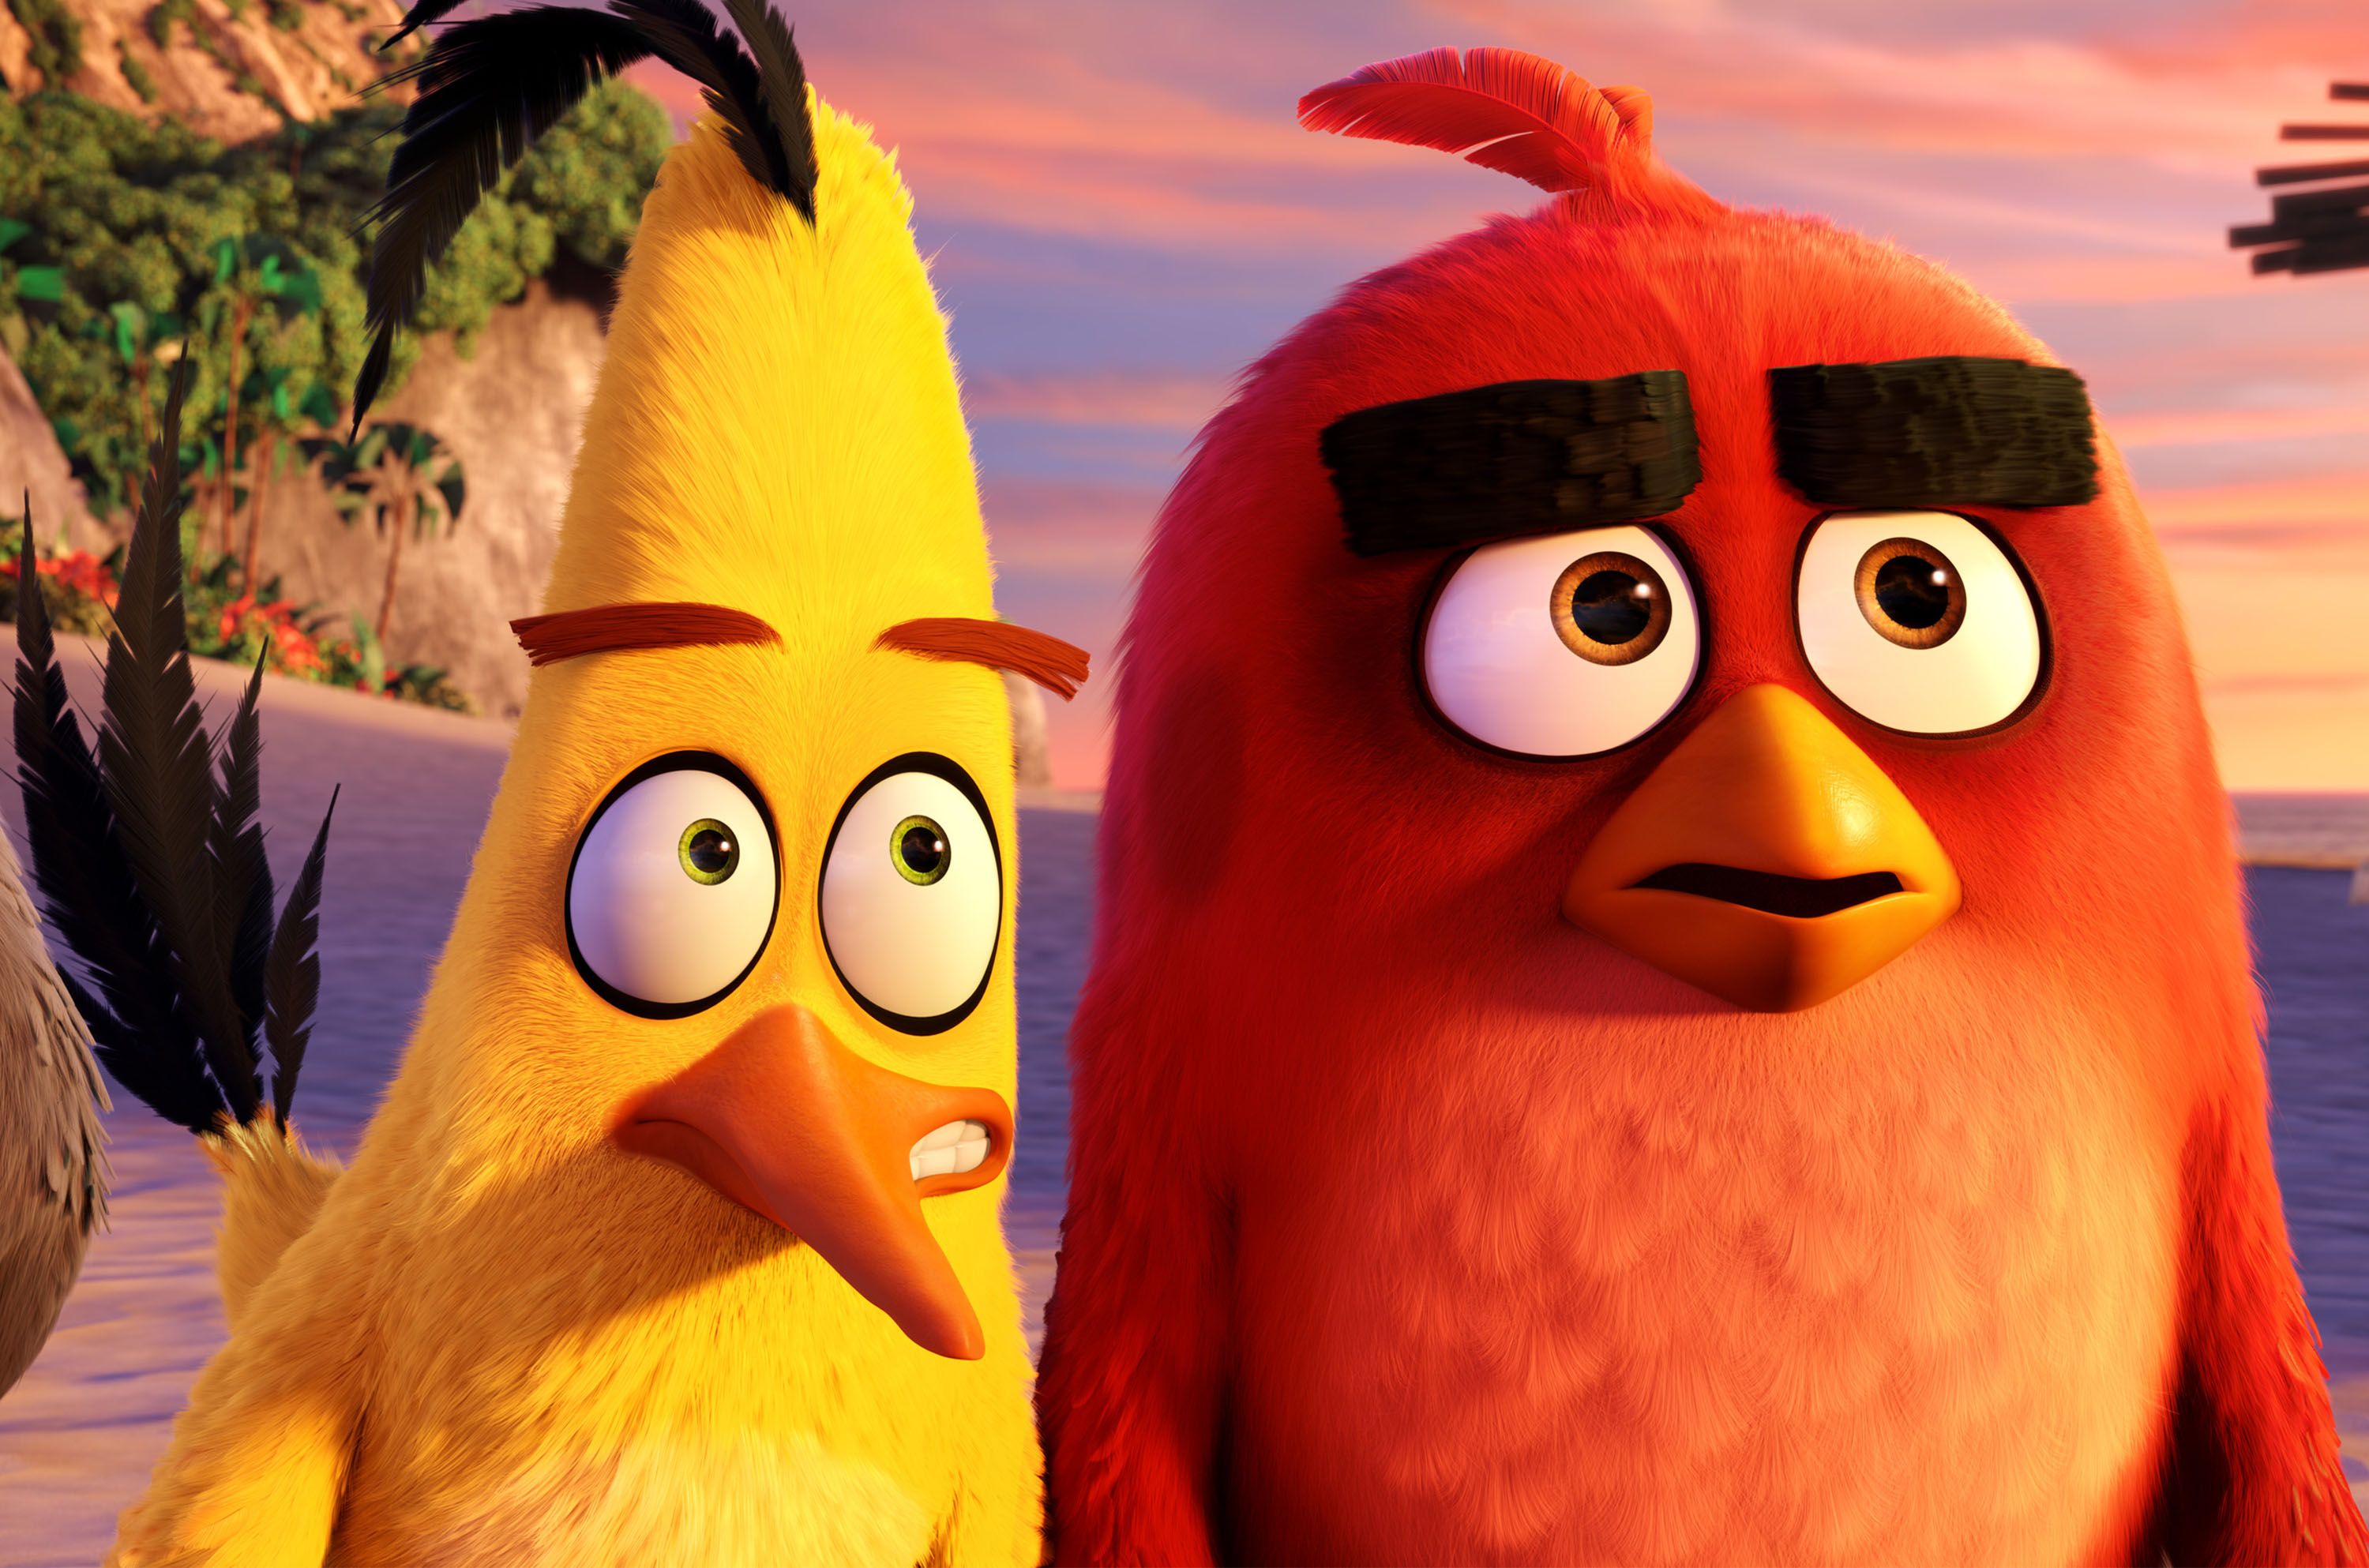 angry-birds-cast-interview-with-bill-hader-and-jason-sudeikis-collider